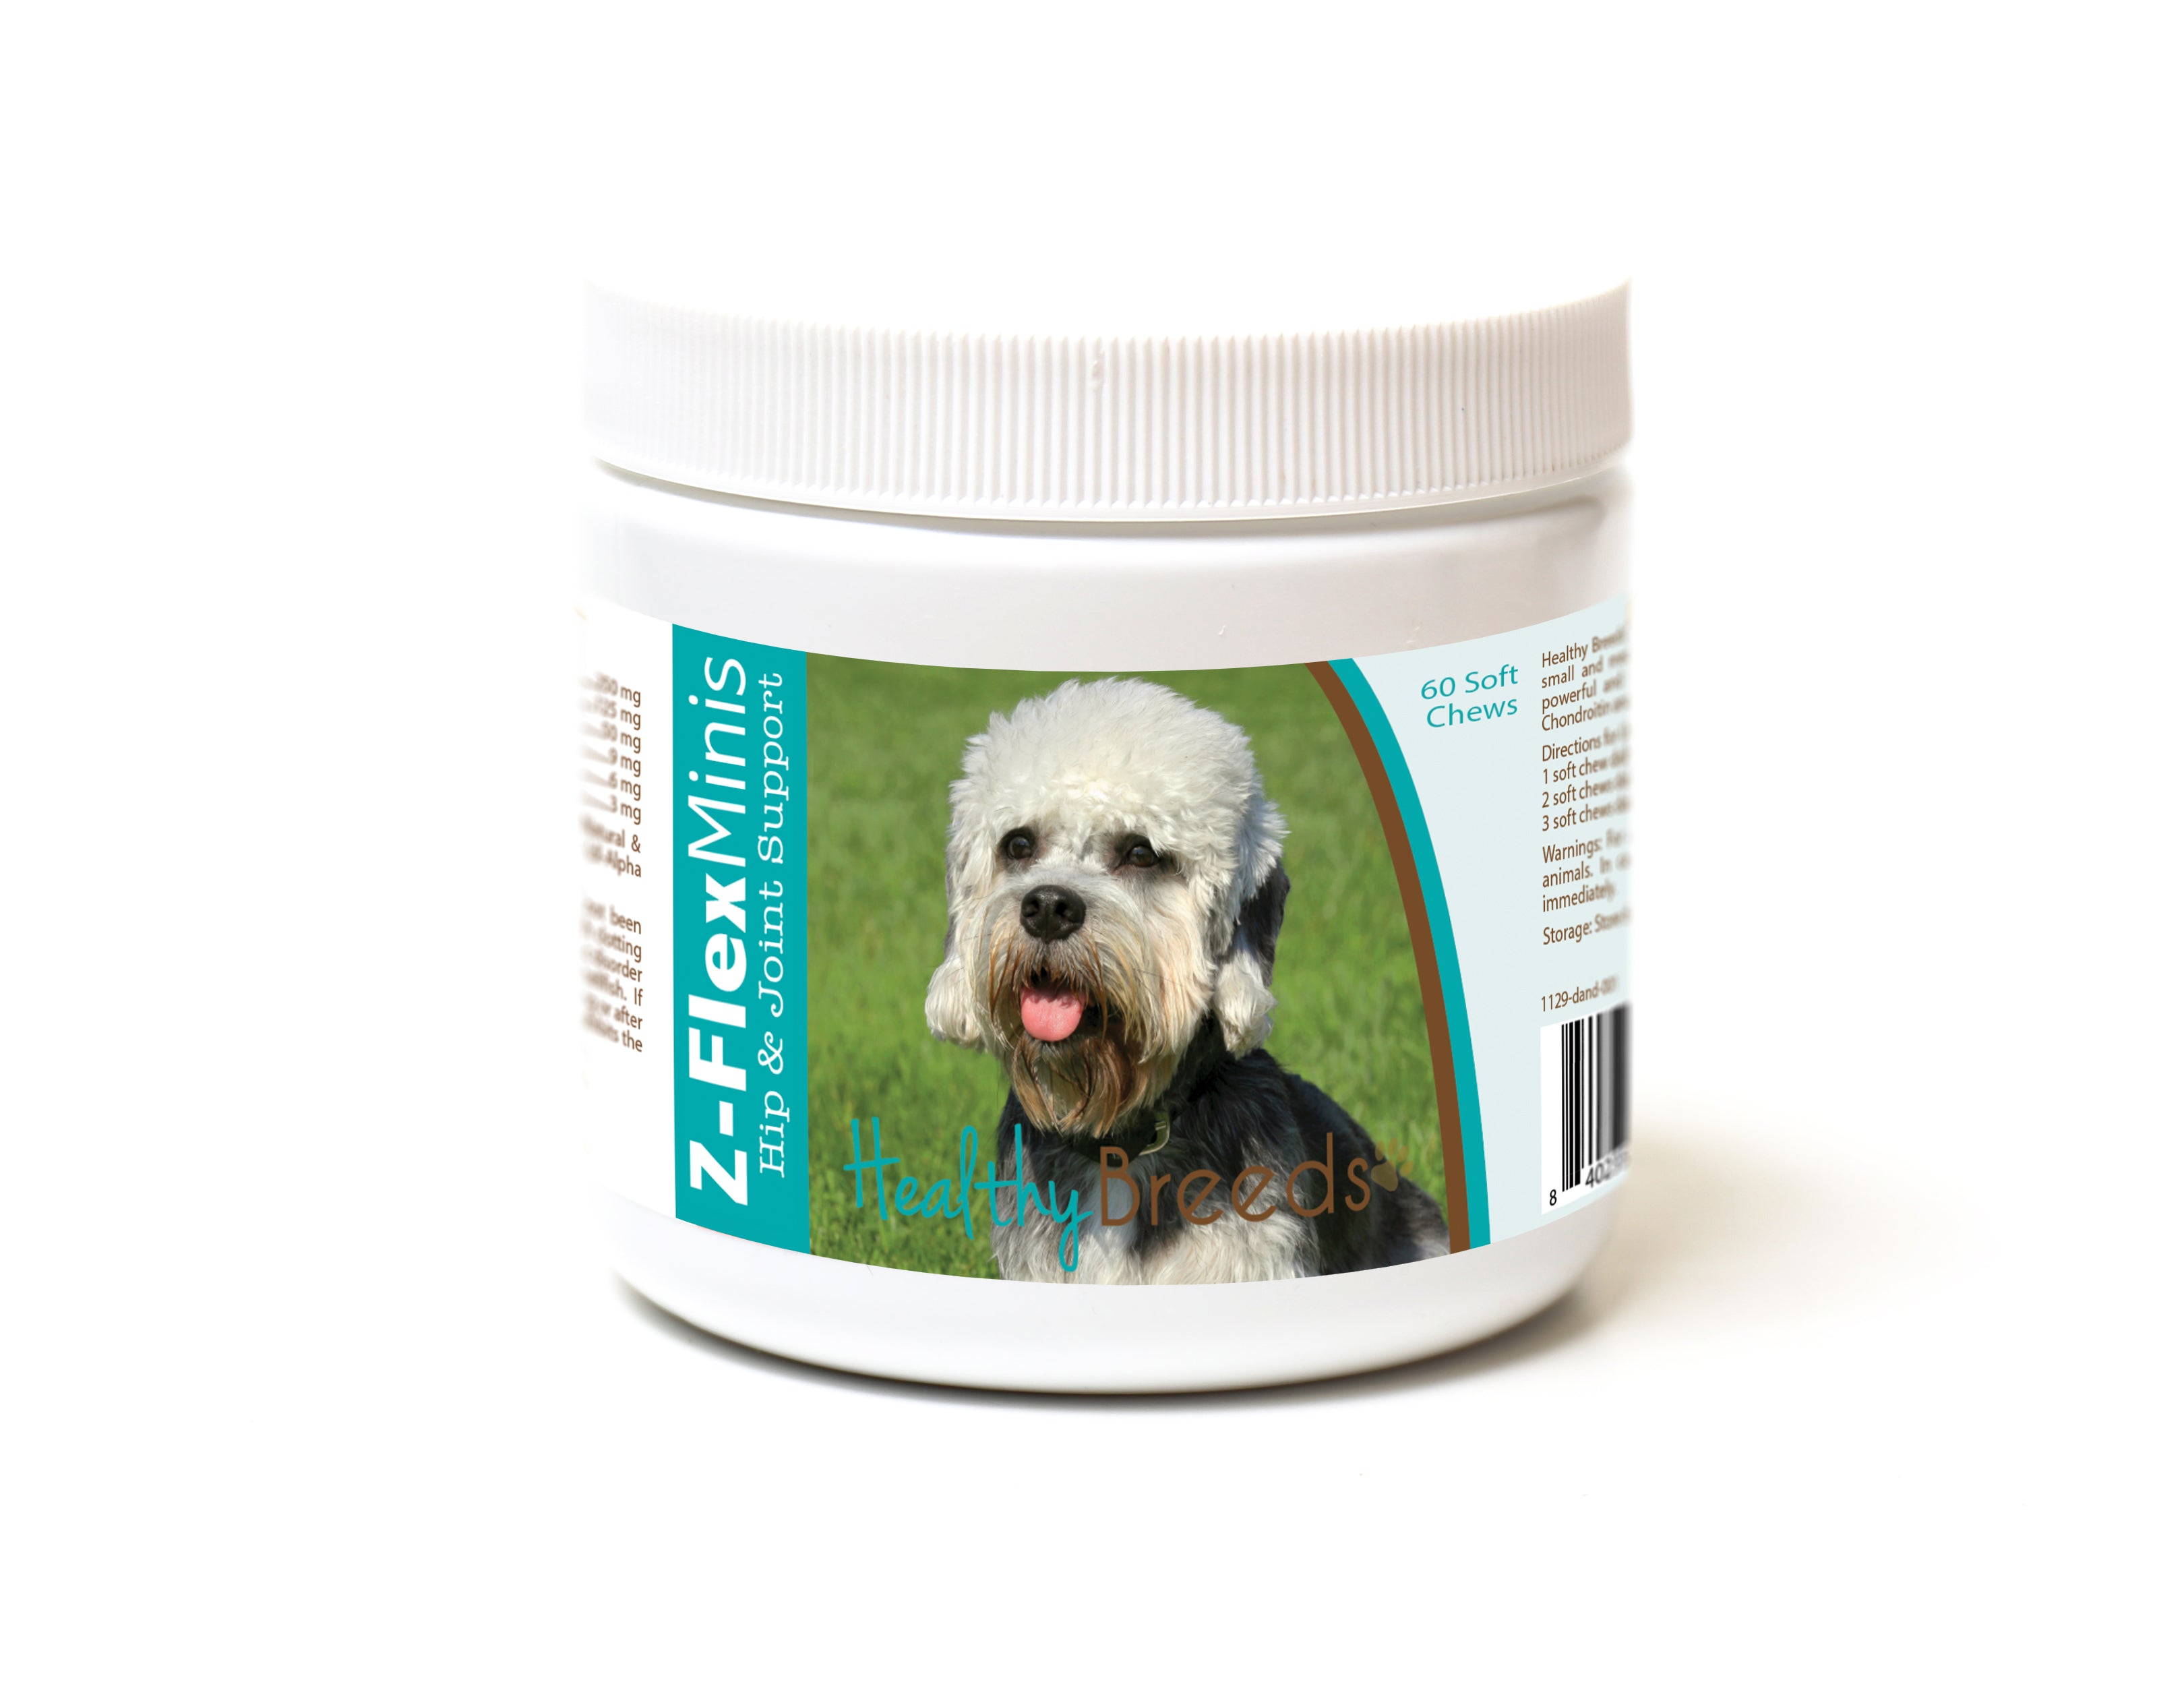 Dandie Dinmont Terrier Z-Flex Minis Hip and Joint Support Soft Chews 60 Count